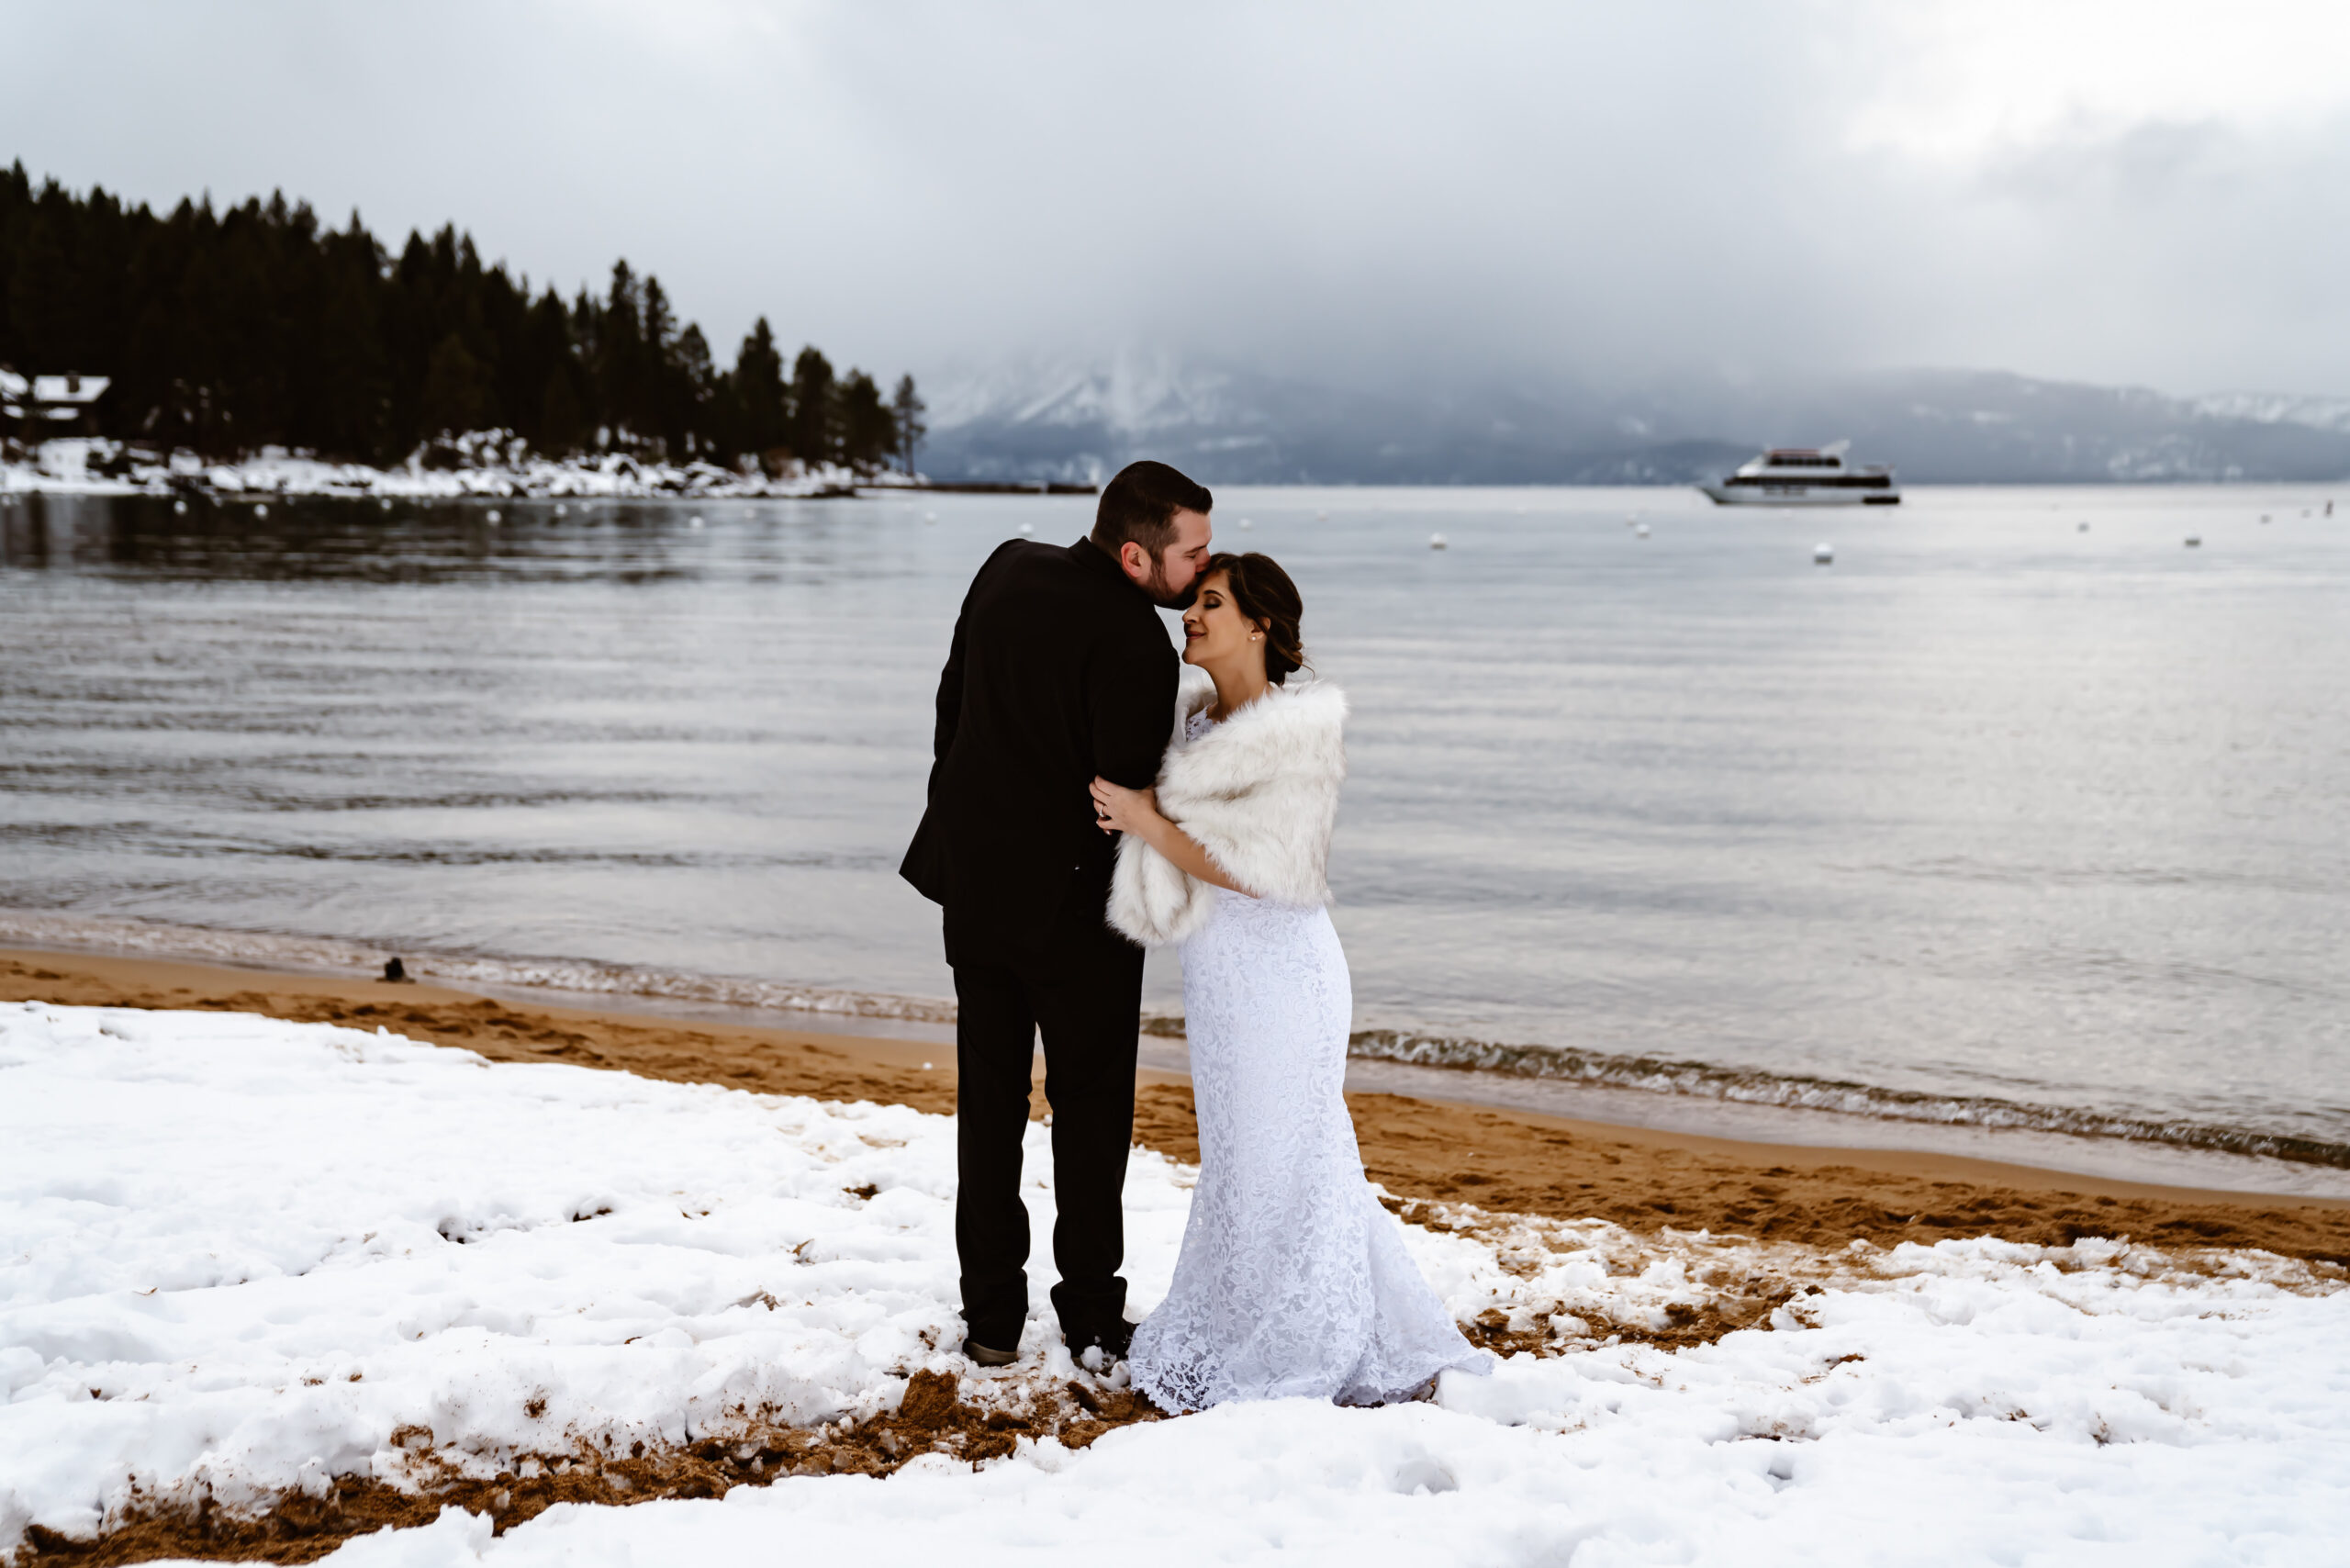 A groom kissing his bride in the snow at Zephyr Cove in Lake Tahoe with the lake and mountain as the backdrop